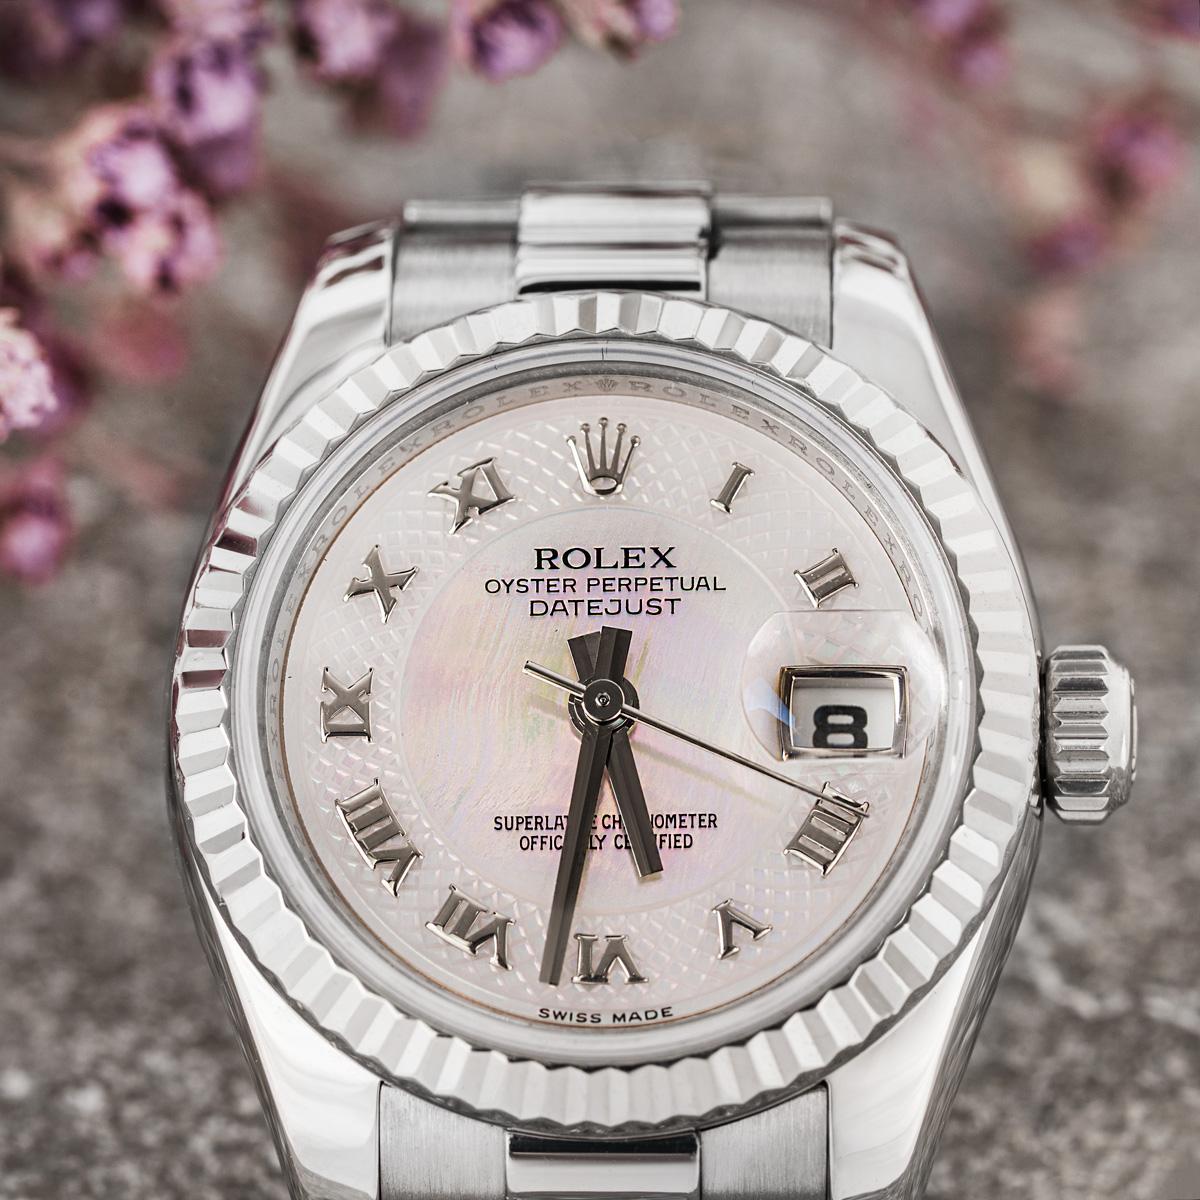 A 26mm white gold ladies Datejust by Rolex. Featuring a stunning mother of pearl dial with applied roman numerals and a white gold fluted bezel. Fitted with a sapphire glass, a self-winding automatic movement and a white gold president bracelet